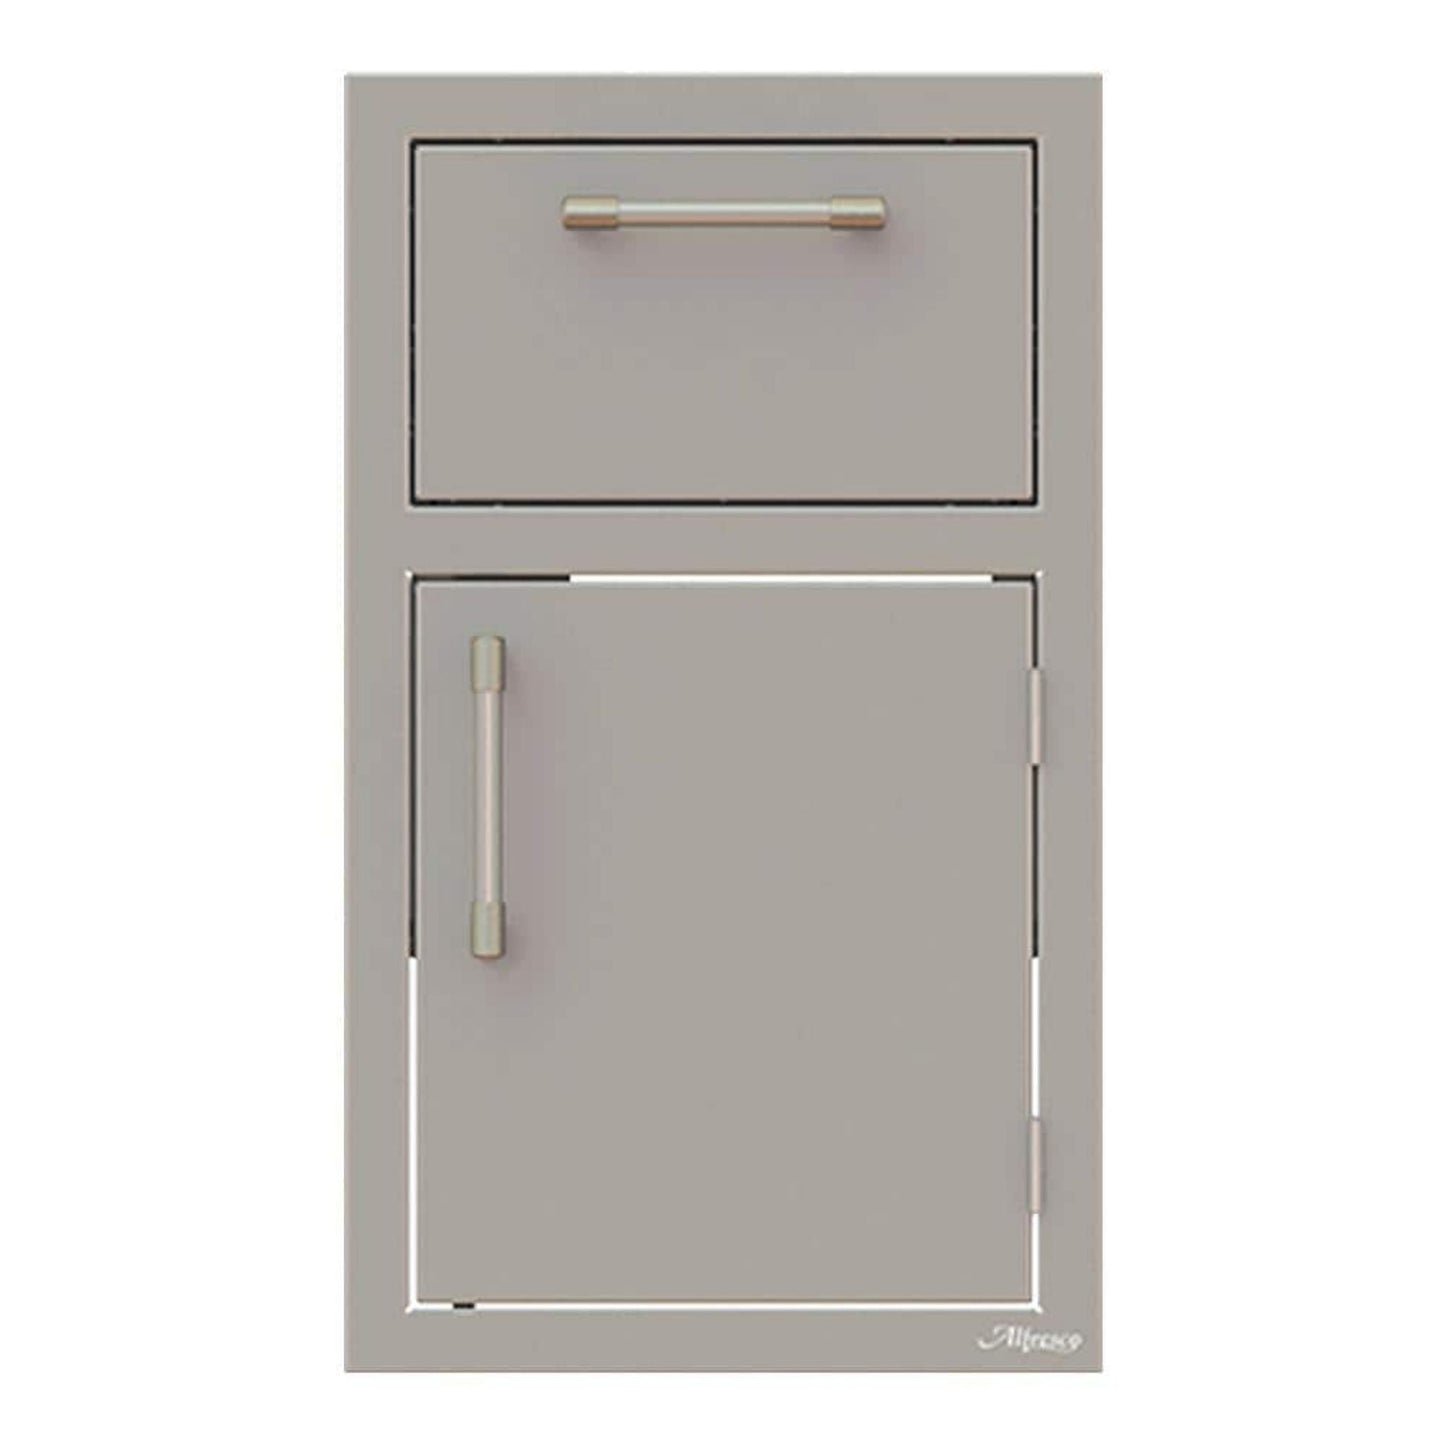 Alfresco 17" Light Green Gloss One Drawer with Door Open Right